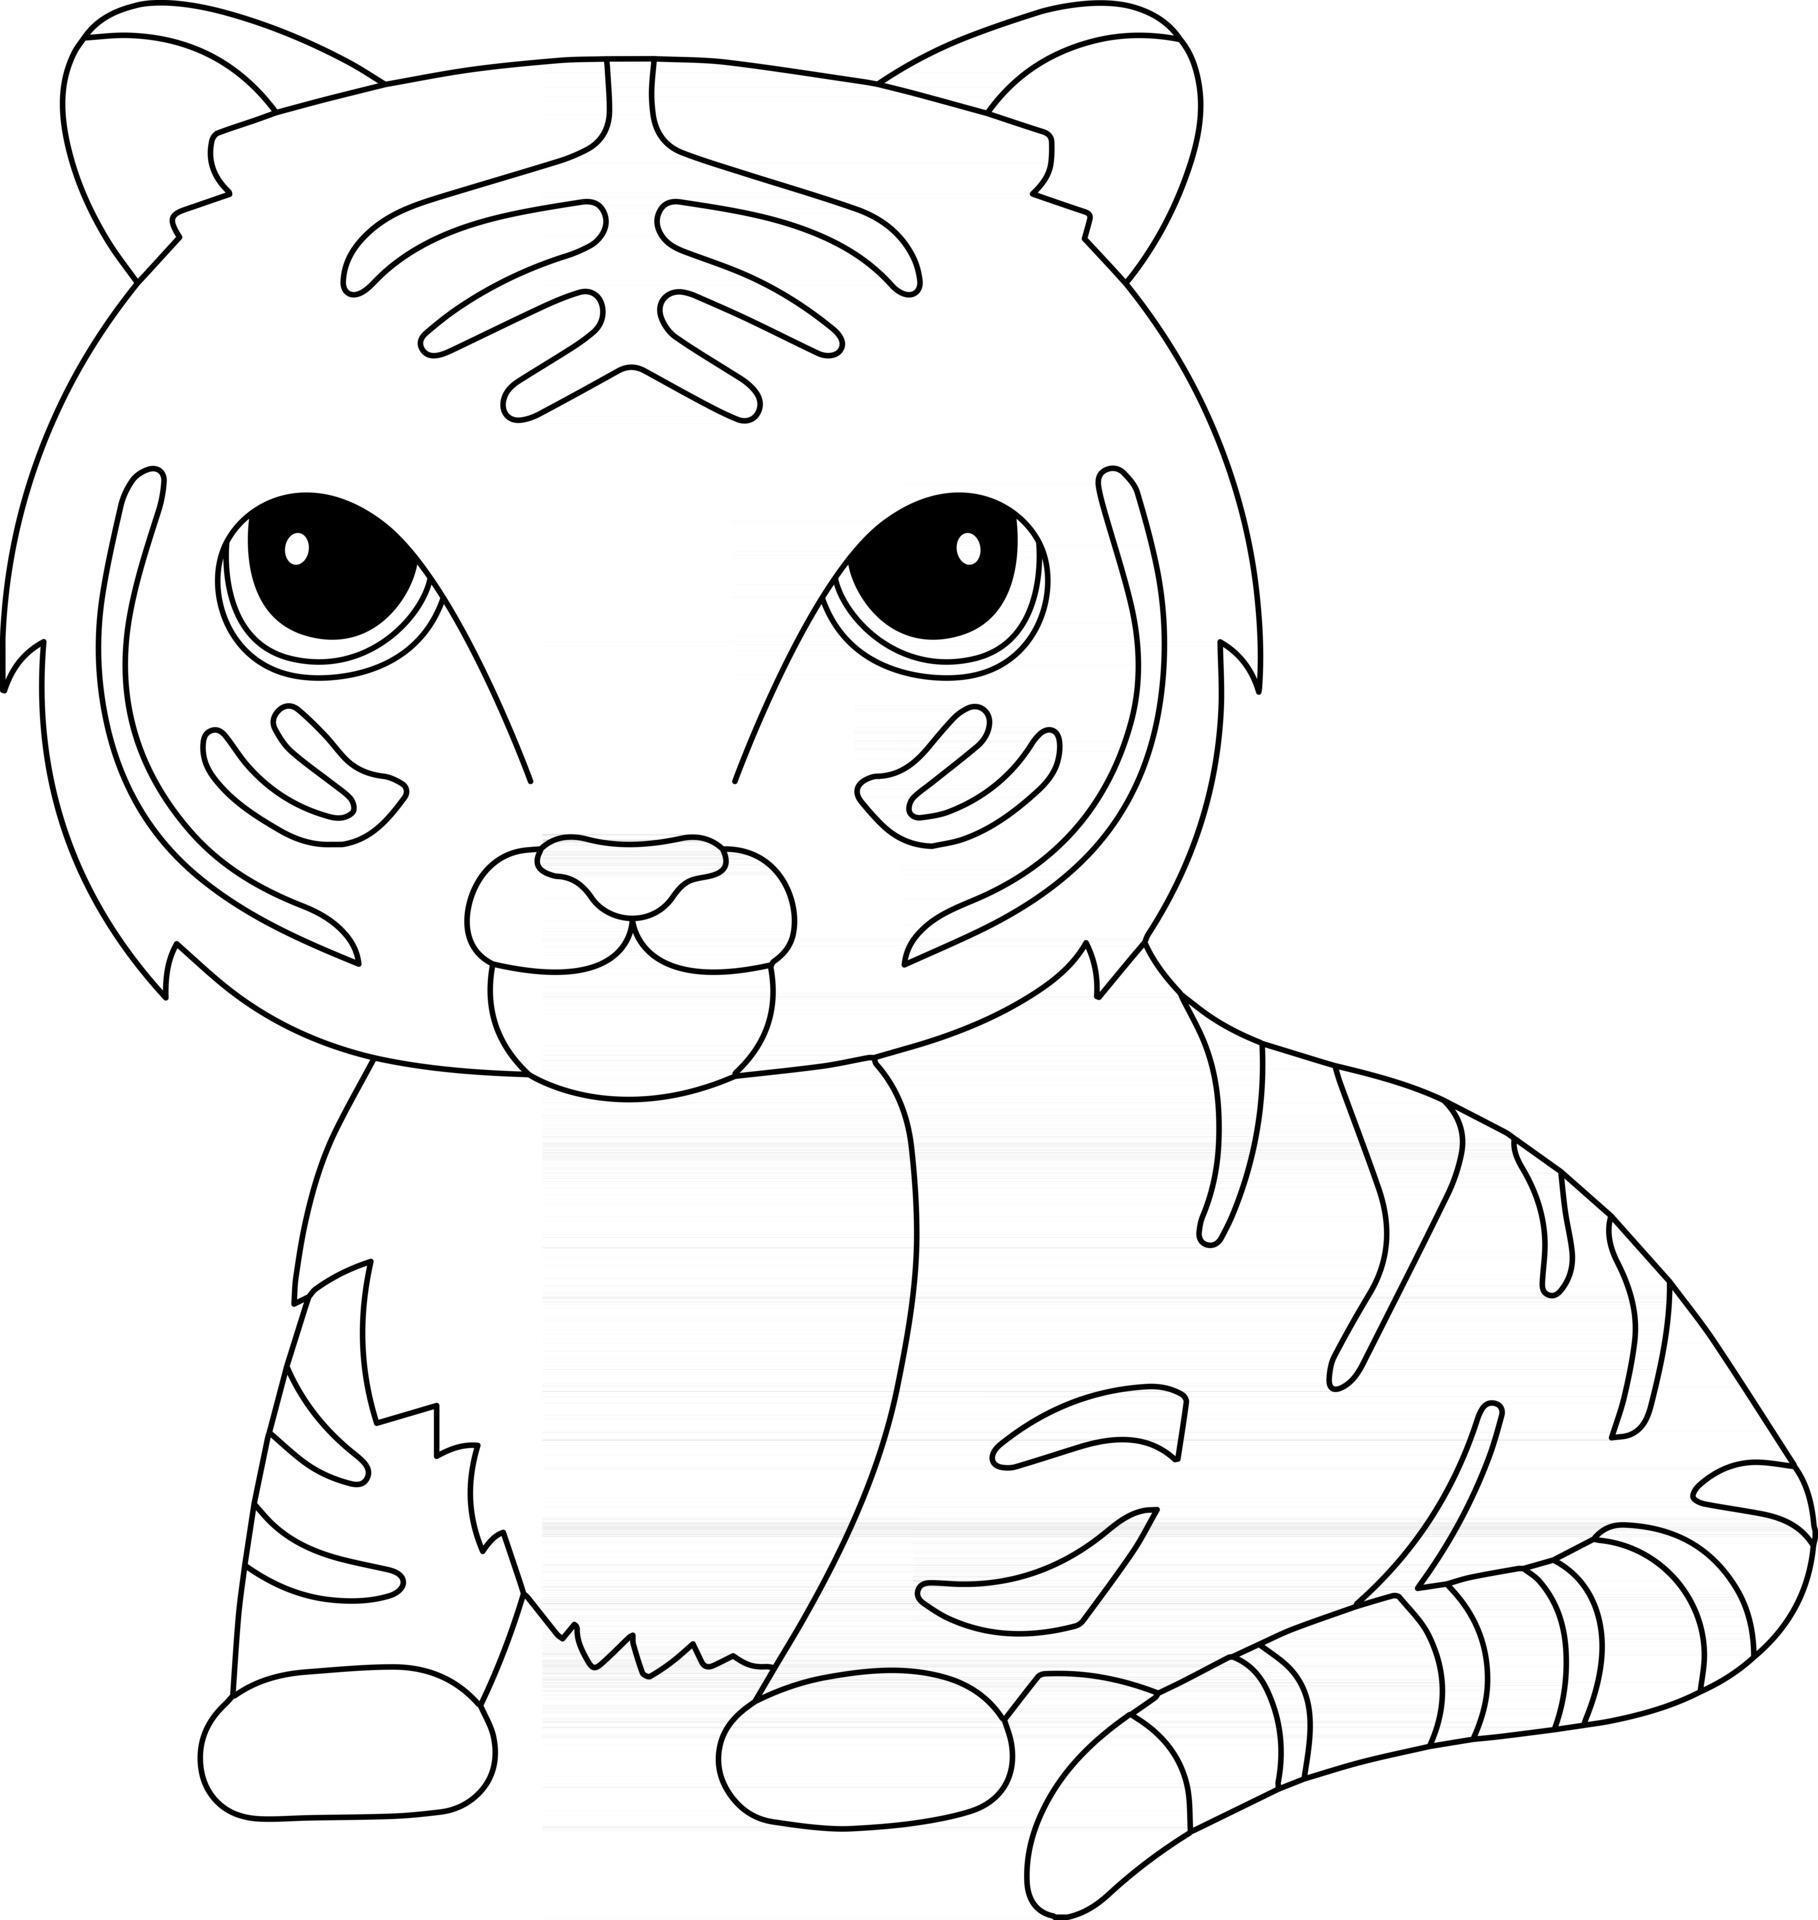 Tiger Kids Coloring Page Great for Beginner Coloring Book 2468194